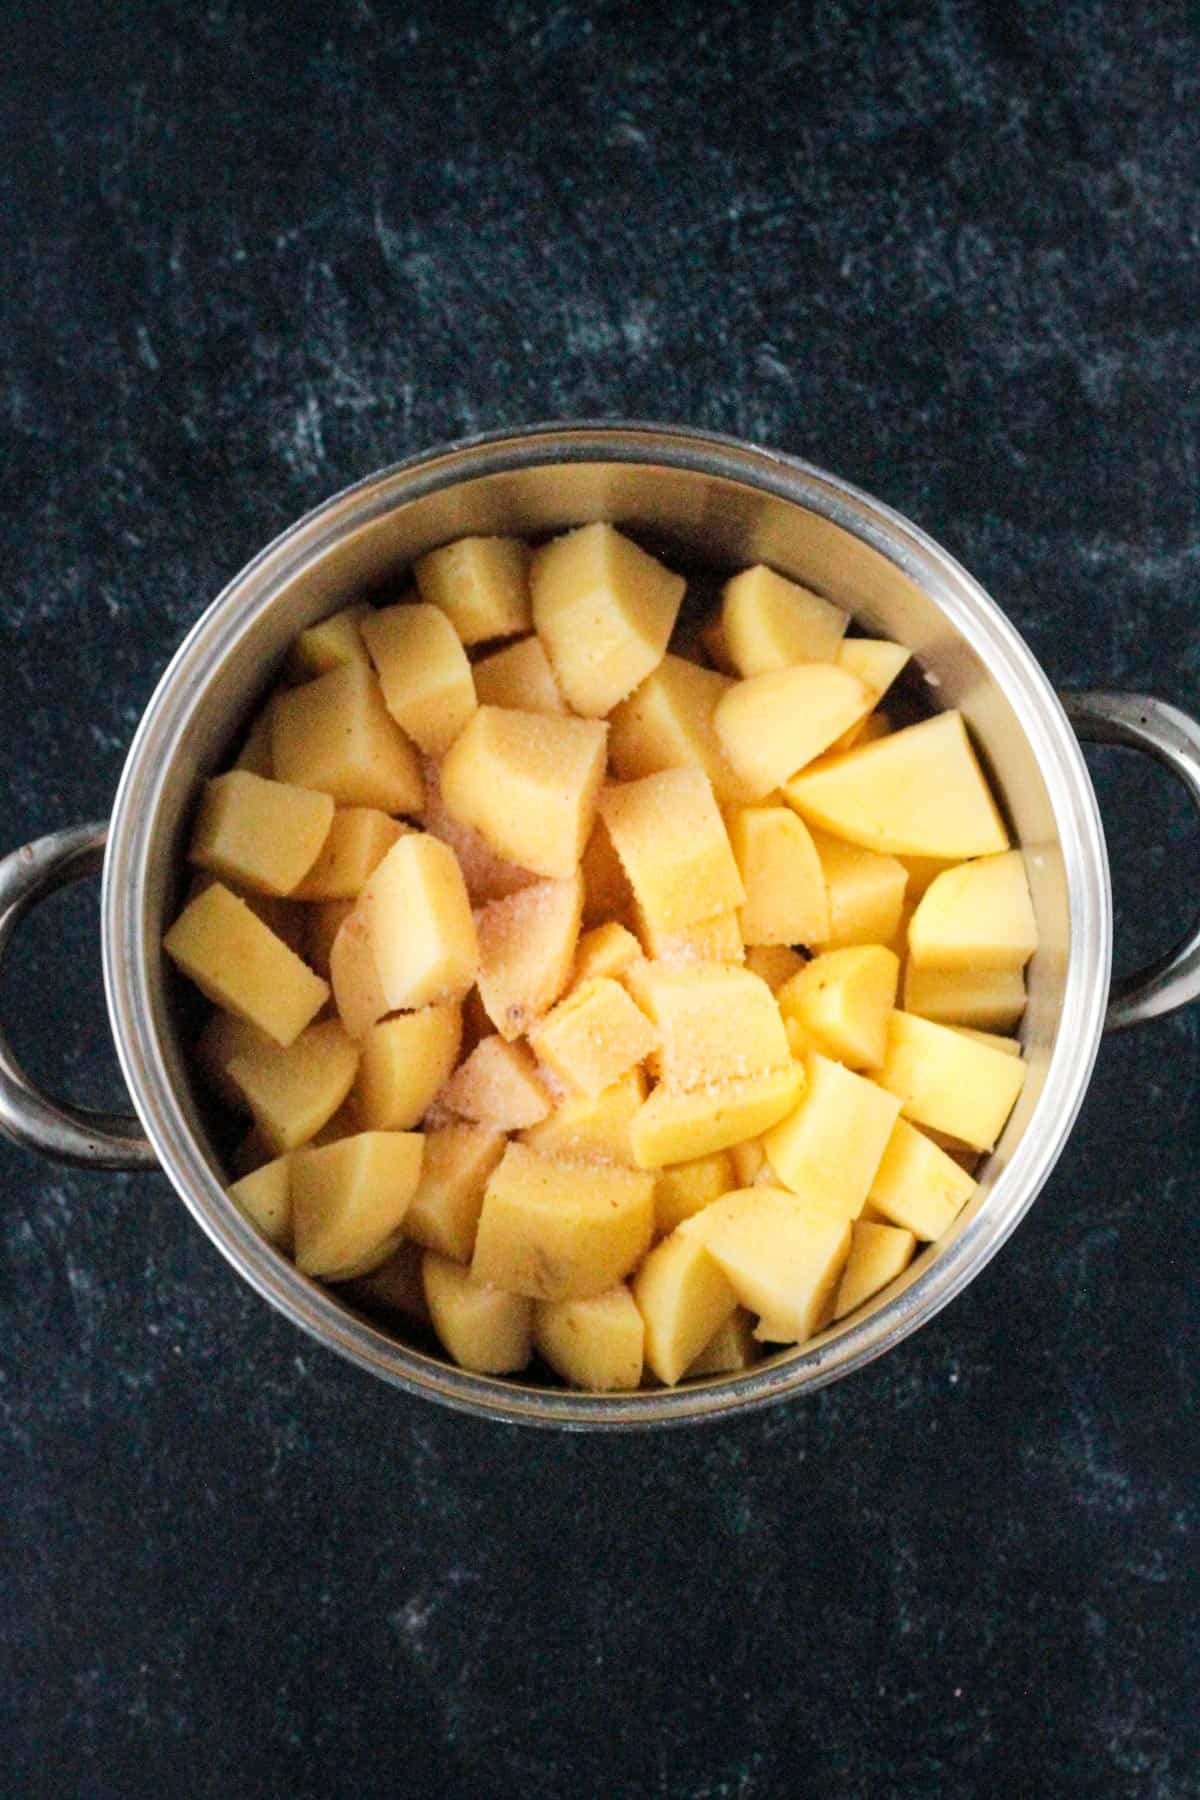 Diced potatoes in a pot with salt and pepper.